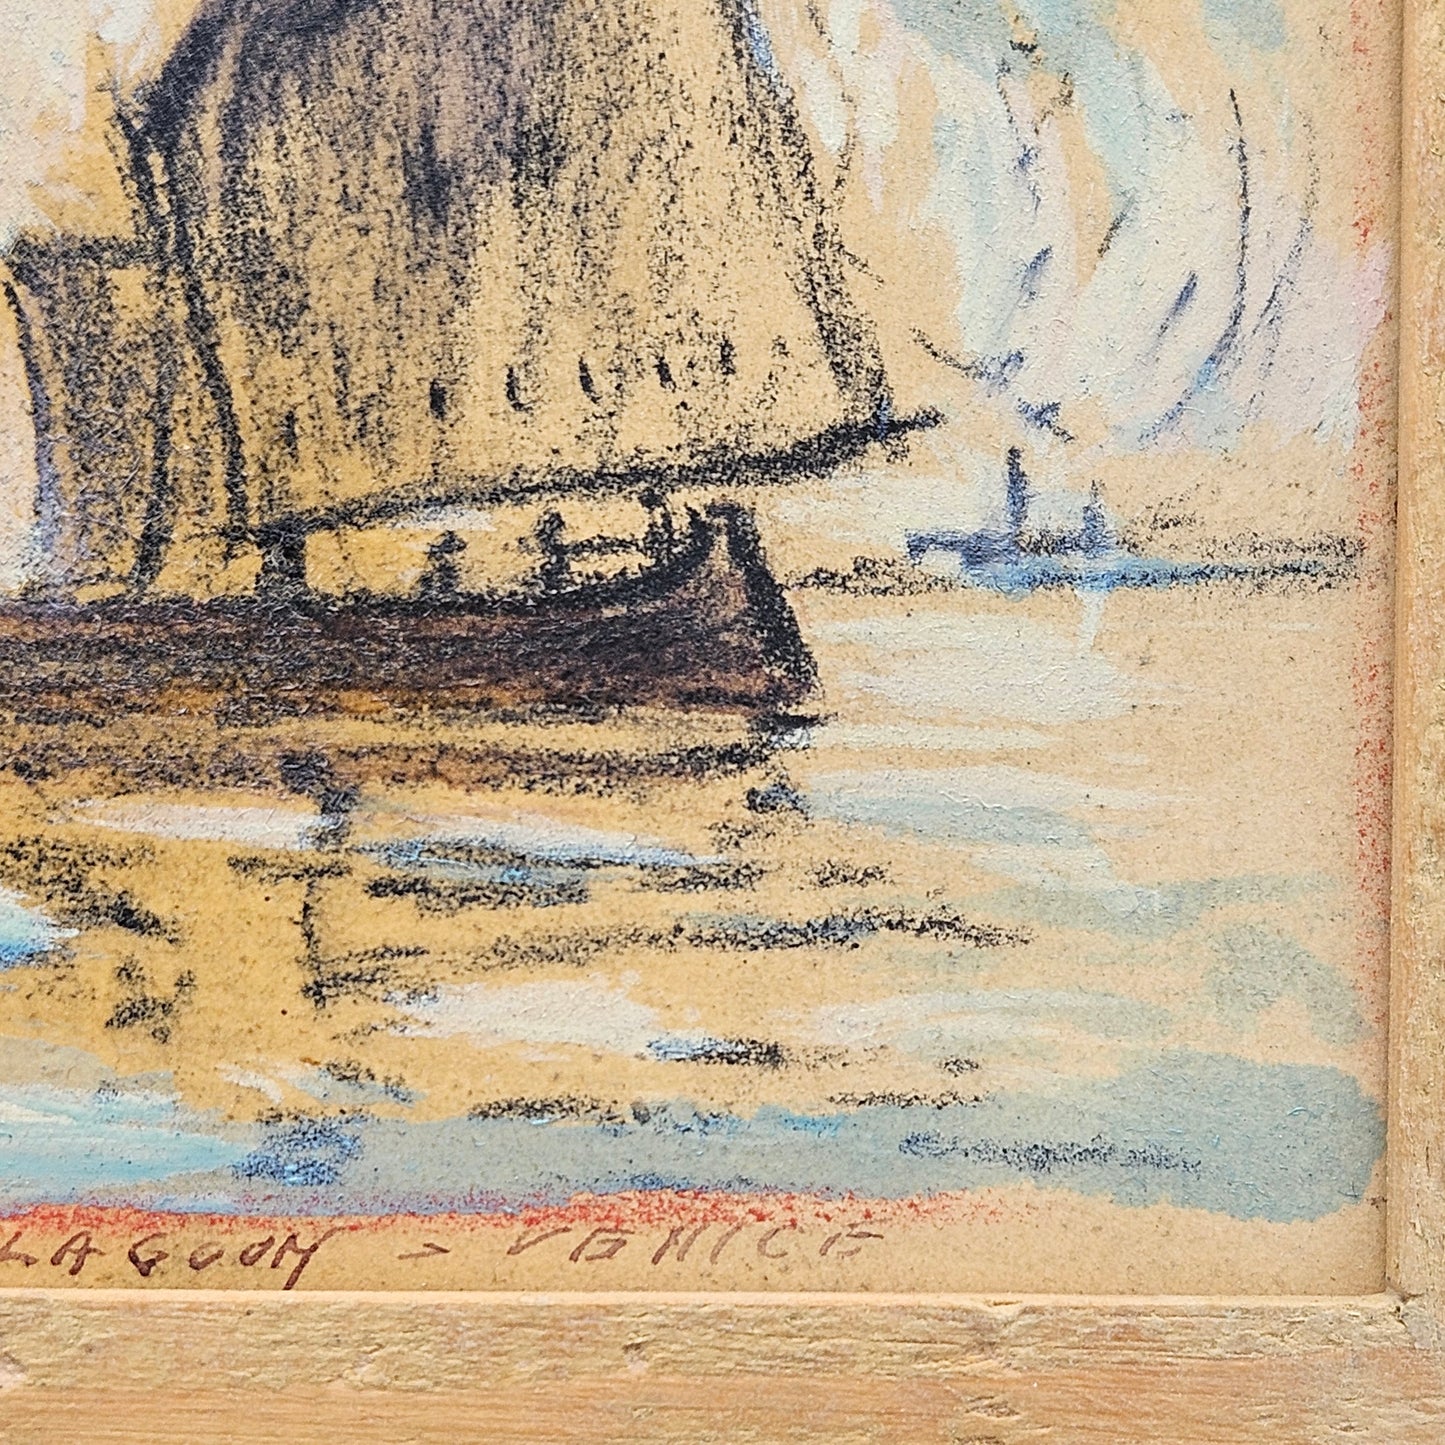 Miniature Vintage Oil on Board Sailboat Painting by John Henry Ramm (1879-1948)